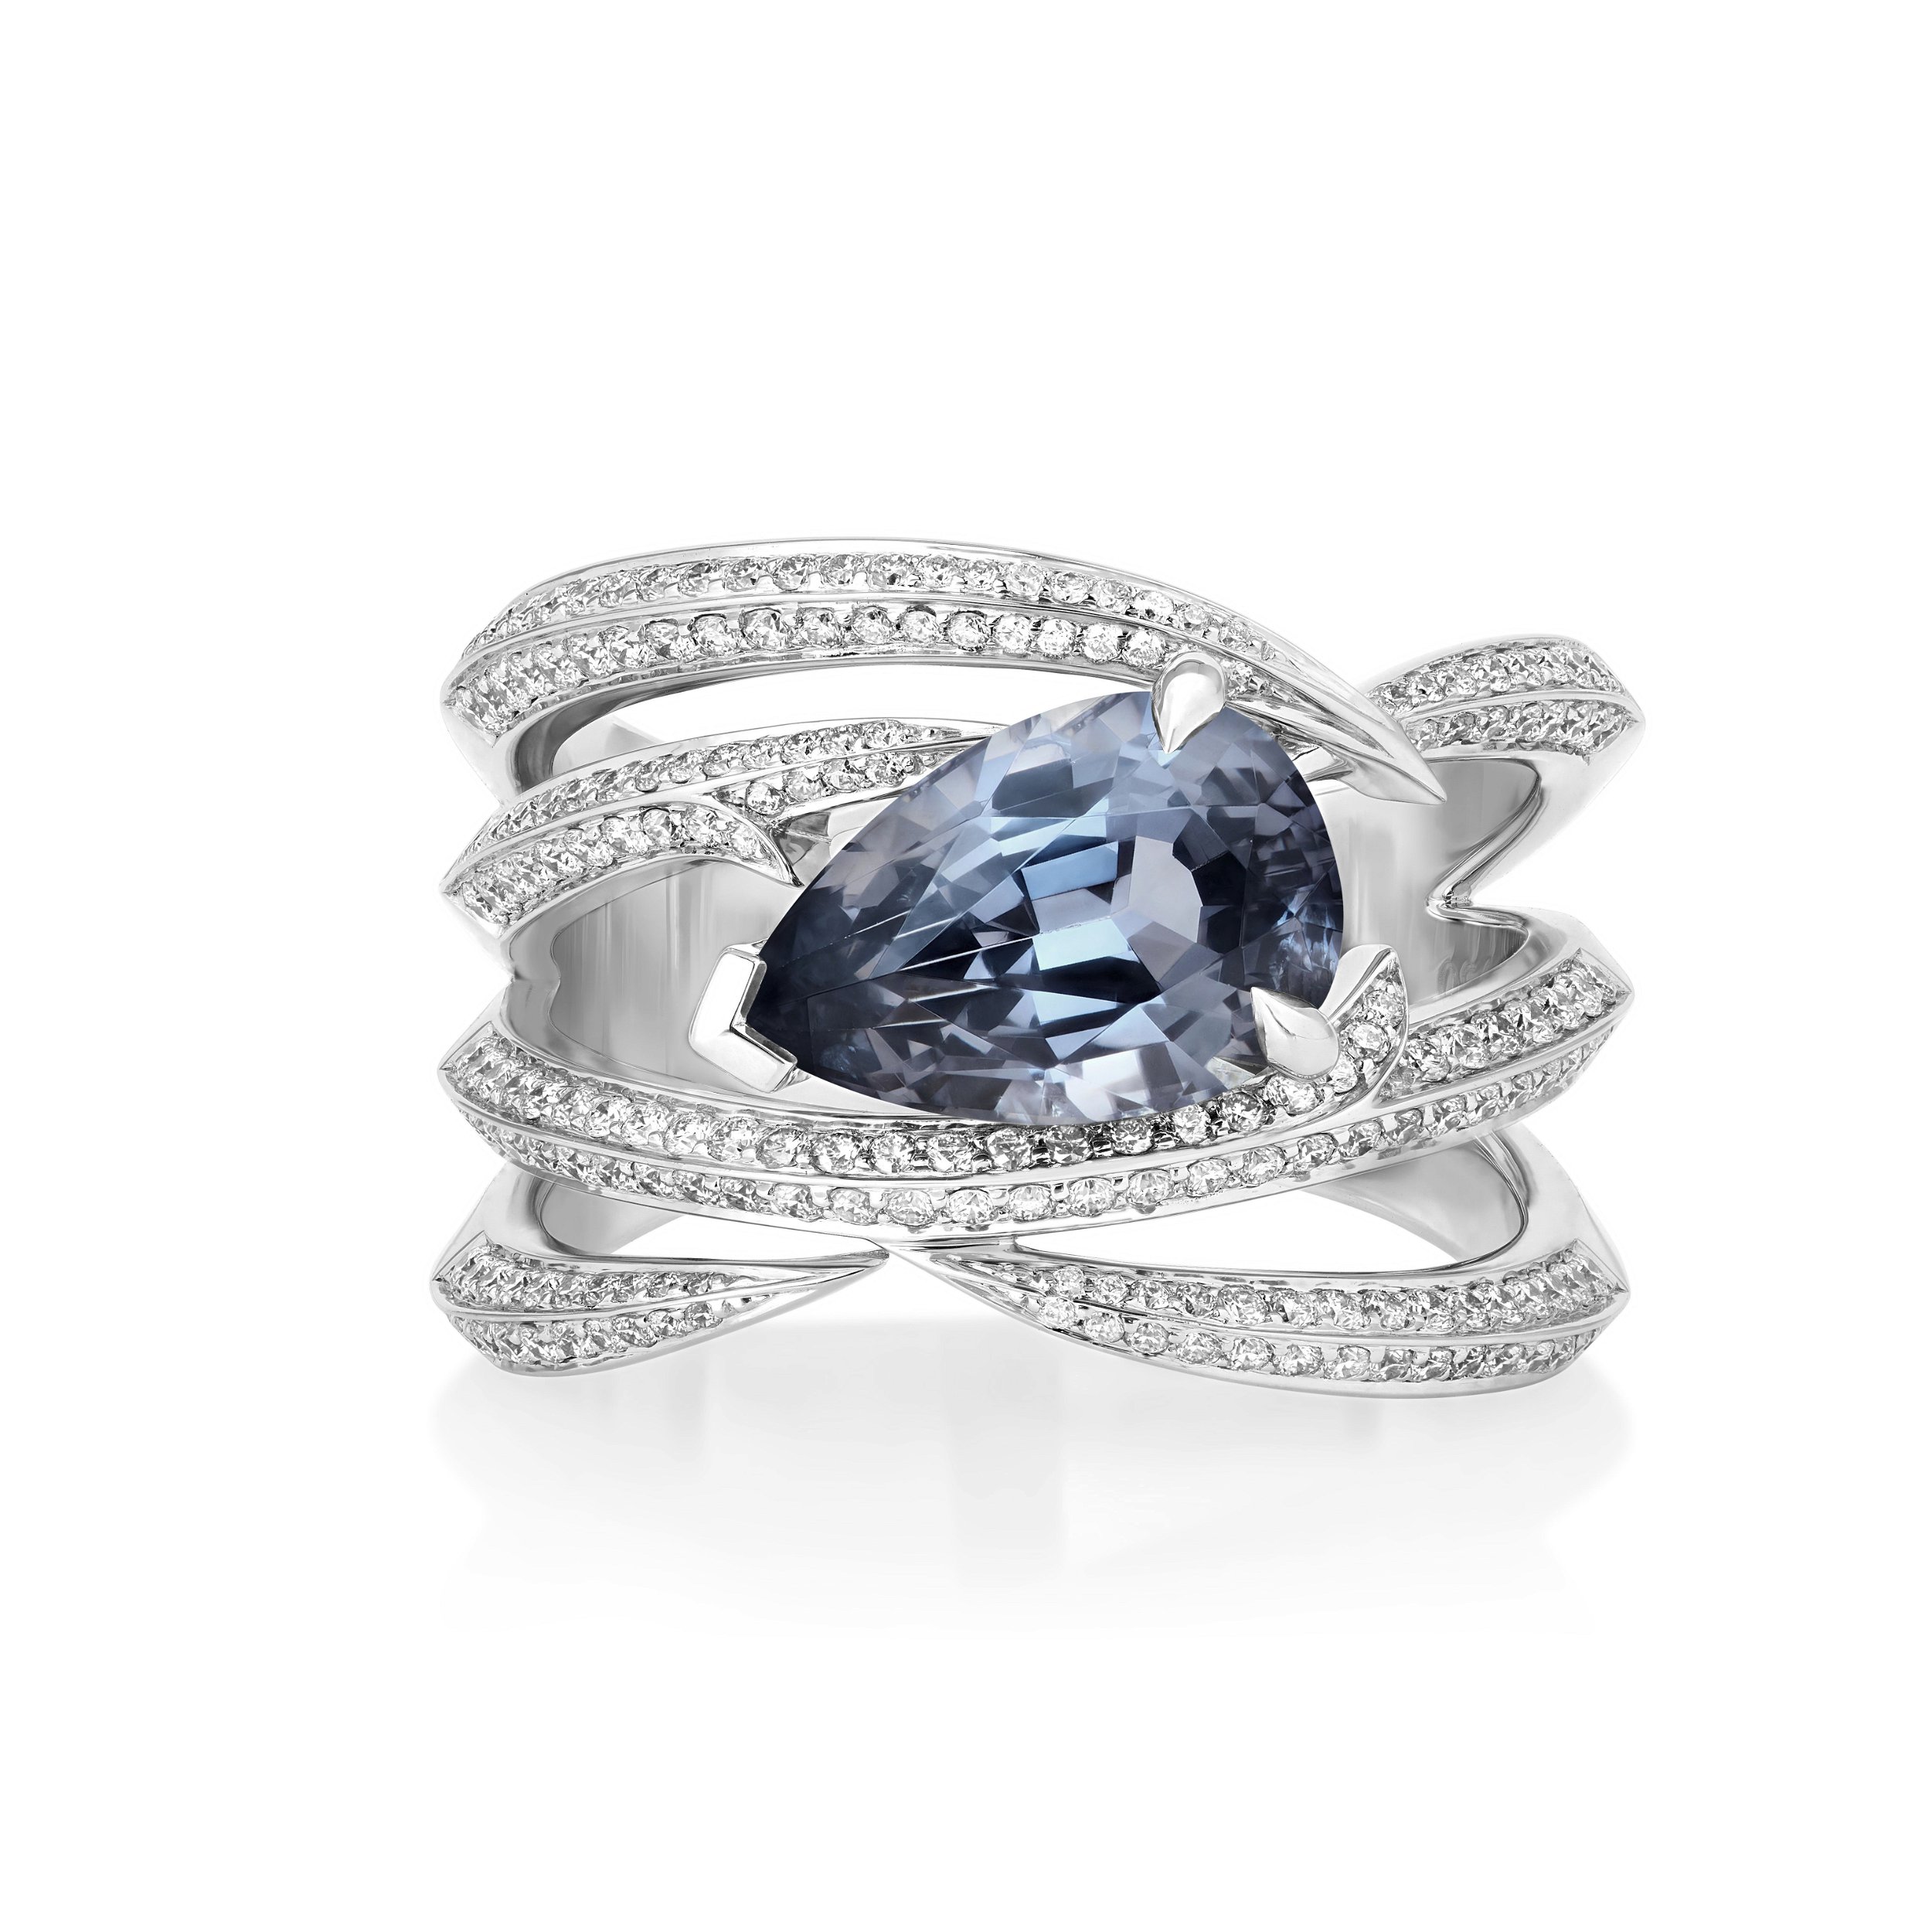 Thorn Embrace Entangled Band Ring with Grey Spinel and White Diamonds in 18kt White Gold - Size 7